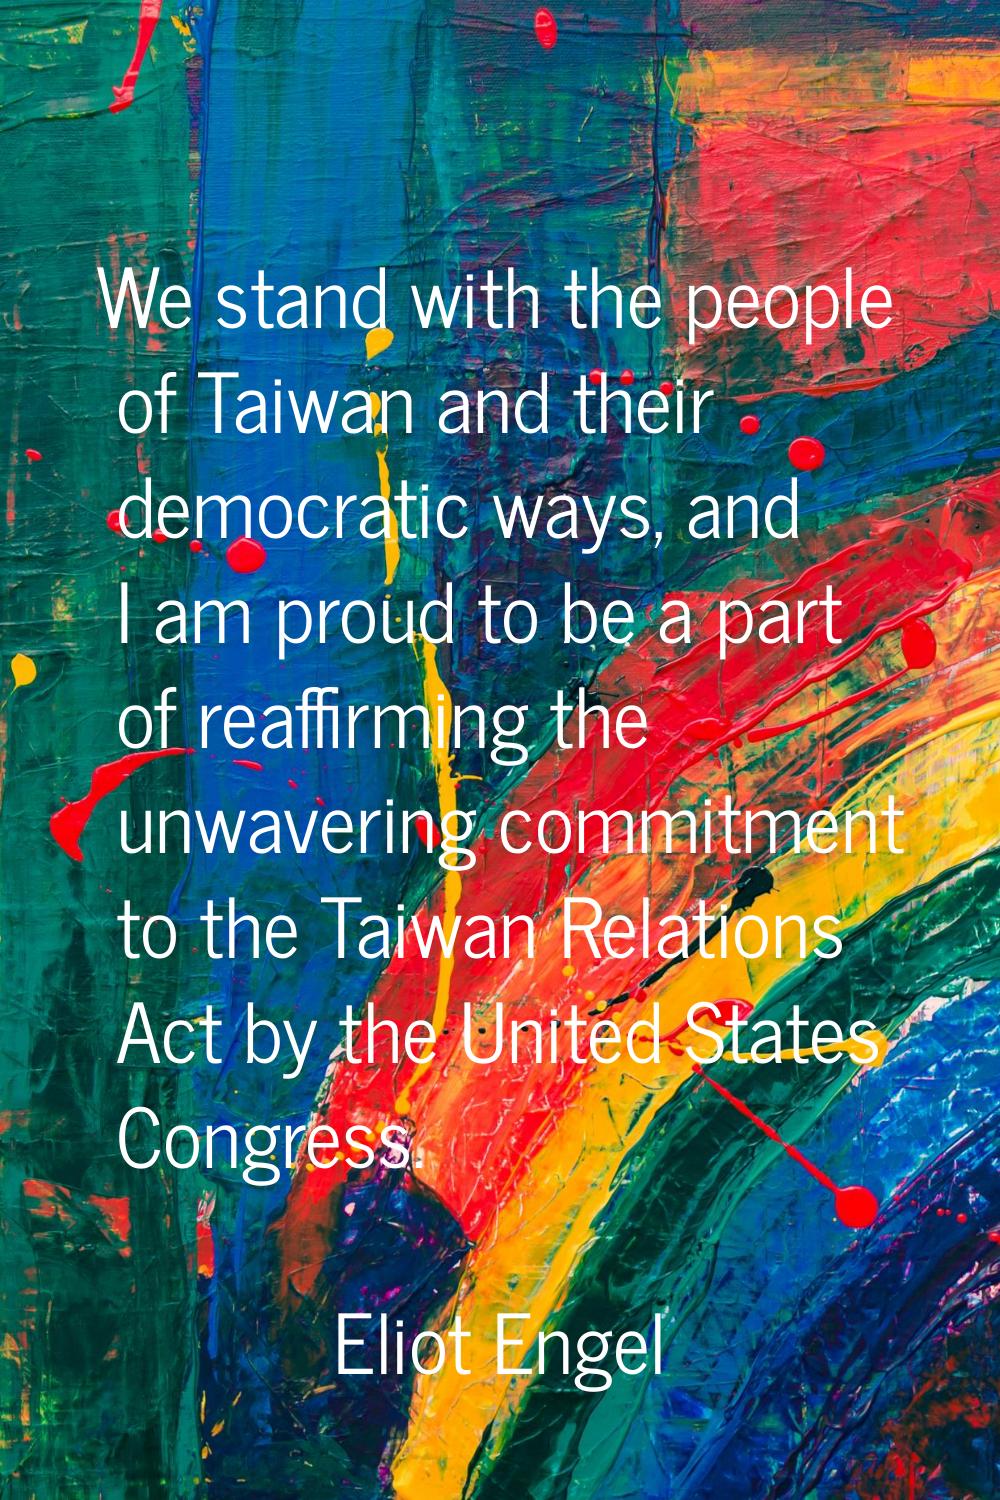 We stand with the people of Taiwan and their democratic ways, and I am proud to be a part of reaffi